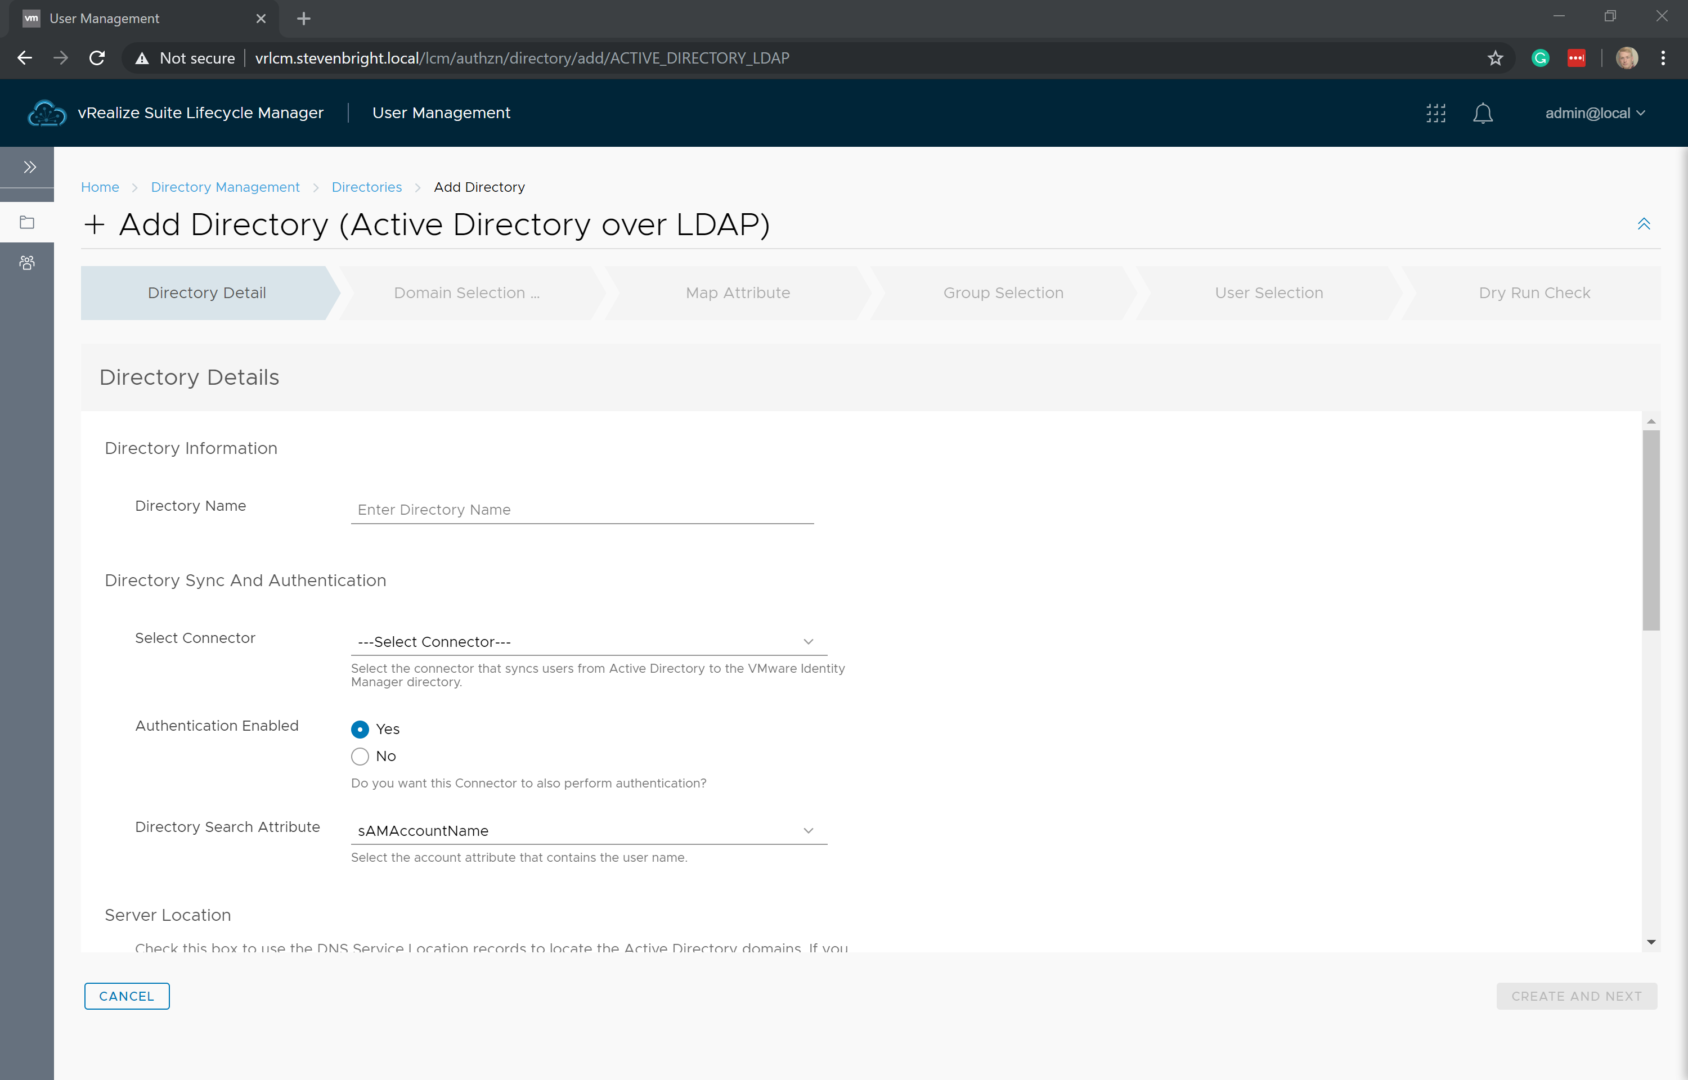 vRealize Suite Lifecycle Manager - User Management - Directory Management - Add Directory Wizard - Directory Detail